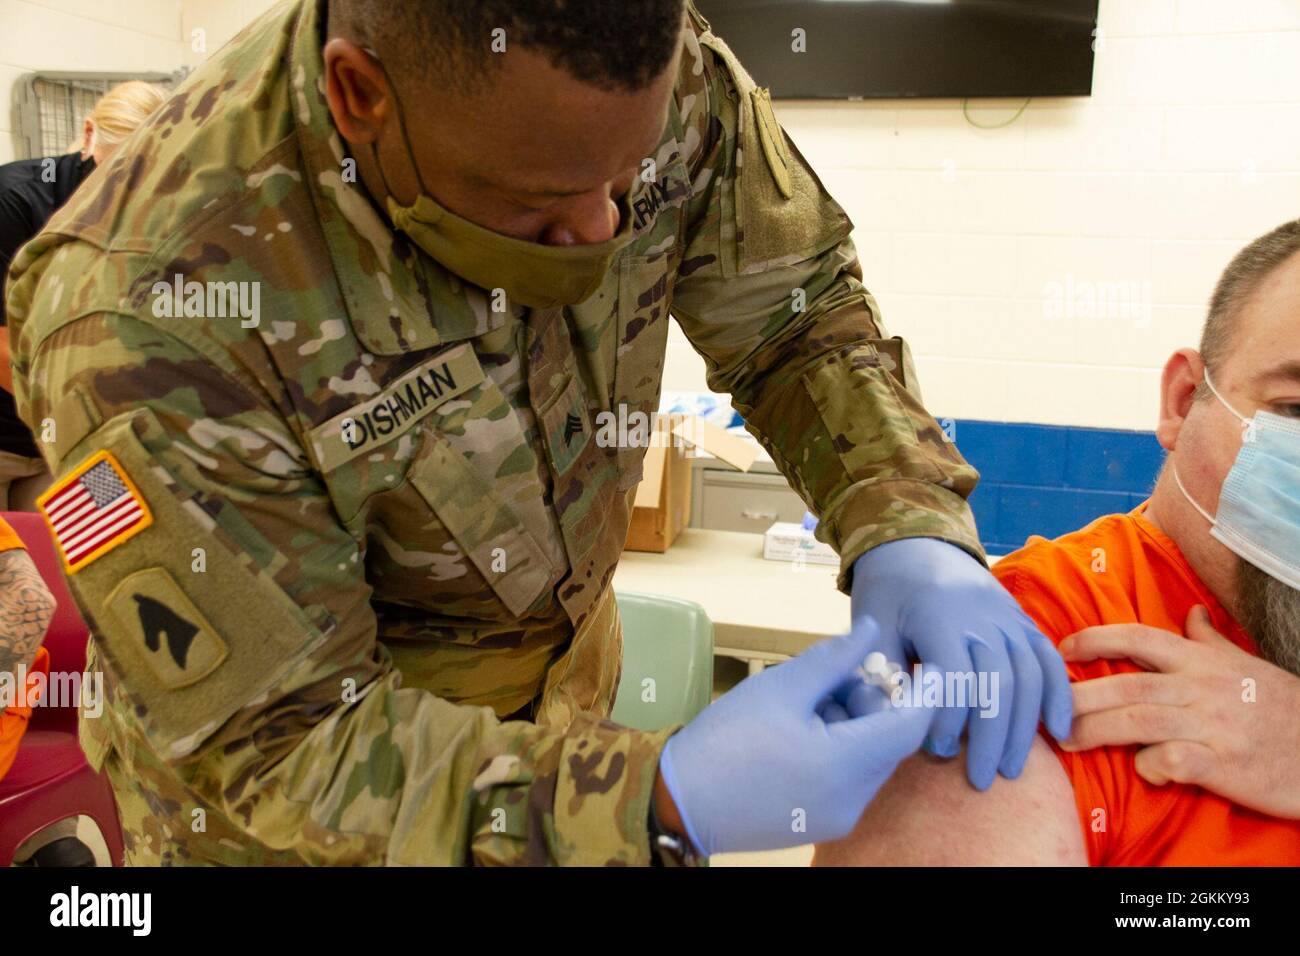 Sgt. Okoarye Dishman, a medic assigned to vaccination strike team two, Kentucky National Guard, administers a COVID-19 vaccination to a detainee at the Big Sandy Regional Detention Center, Paintsville, Ky. May 20. This comes in part to COVID-19 vaccine distribution throughout the commonwealth. Stock Photo